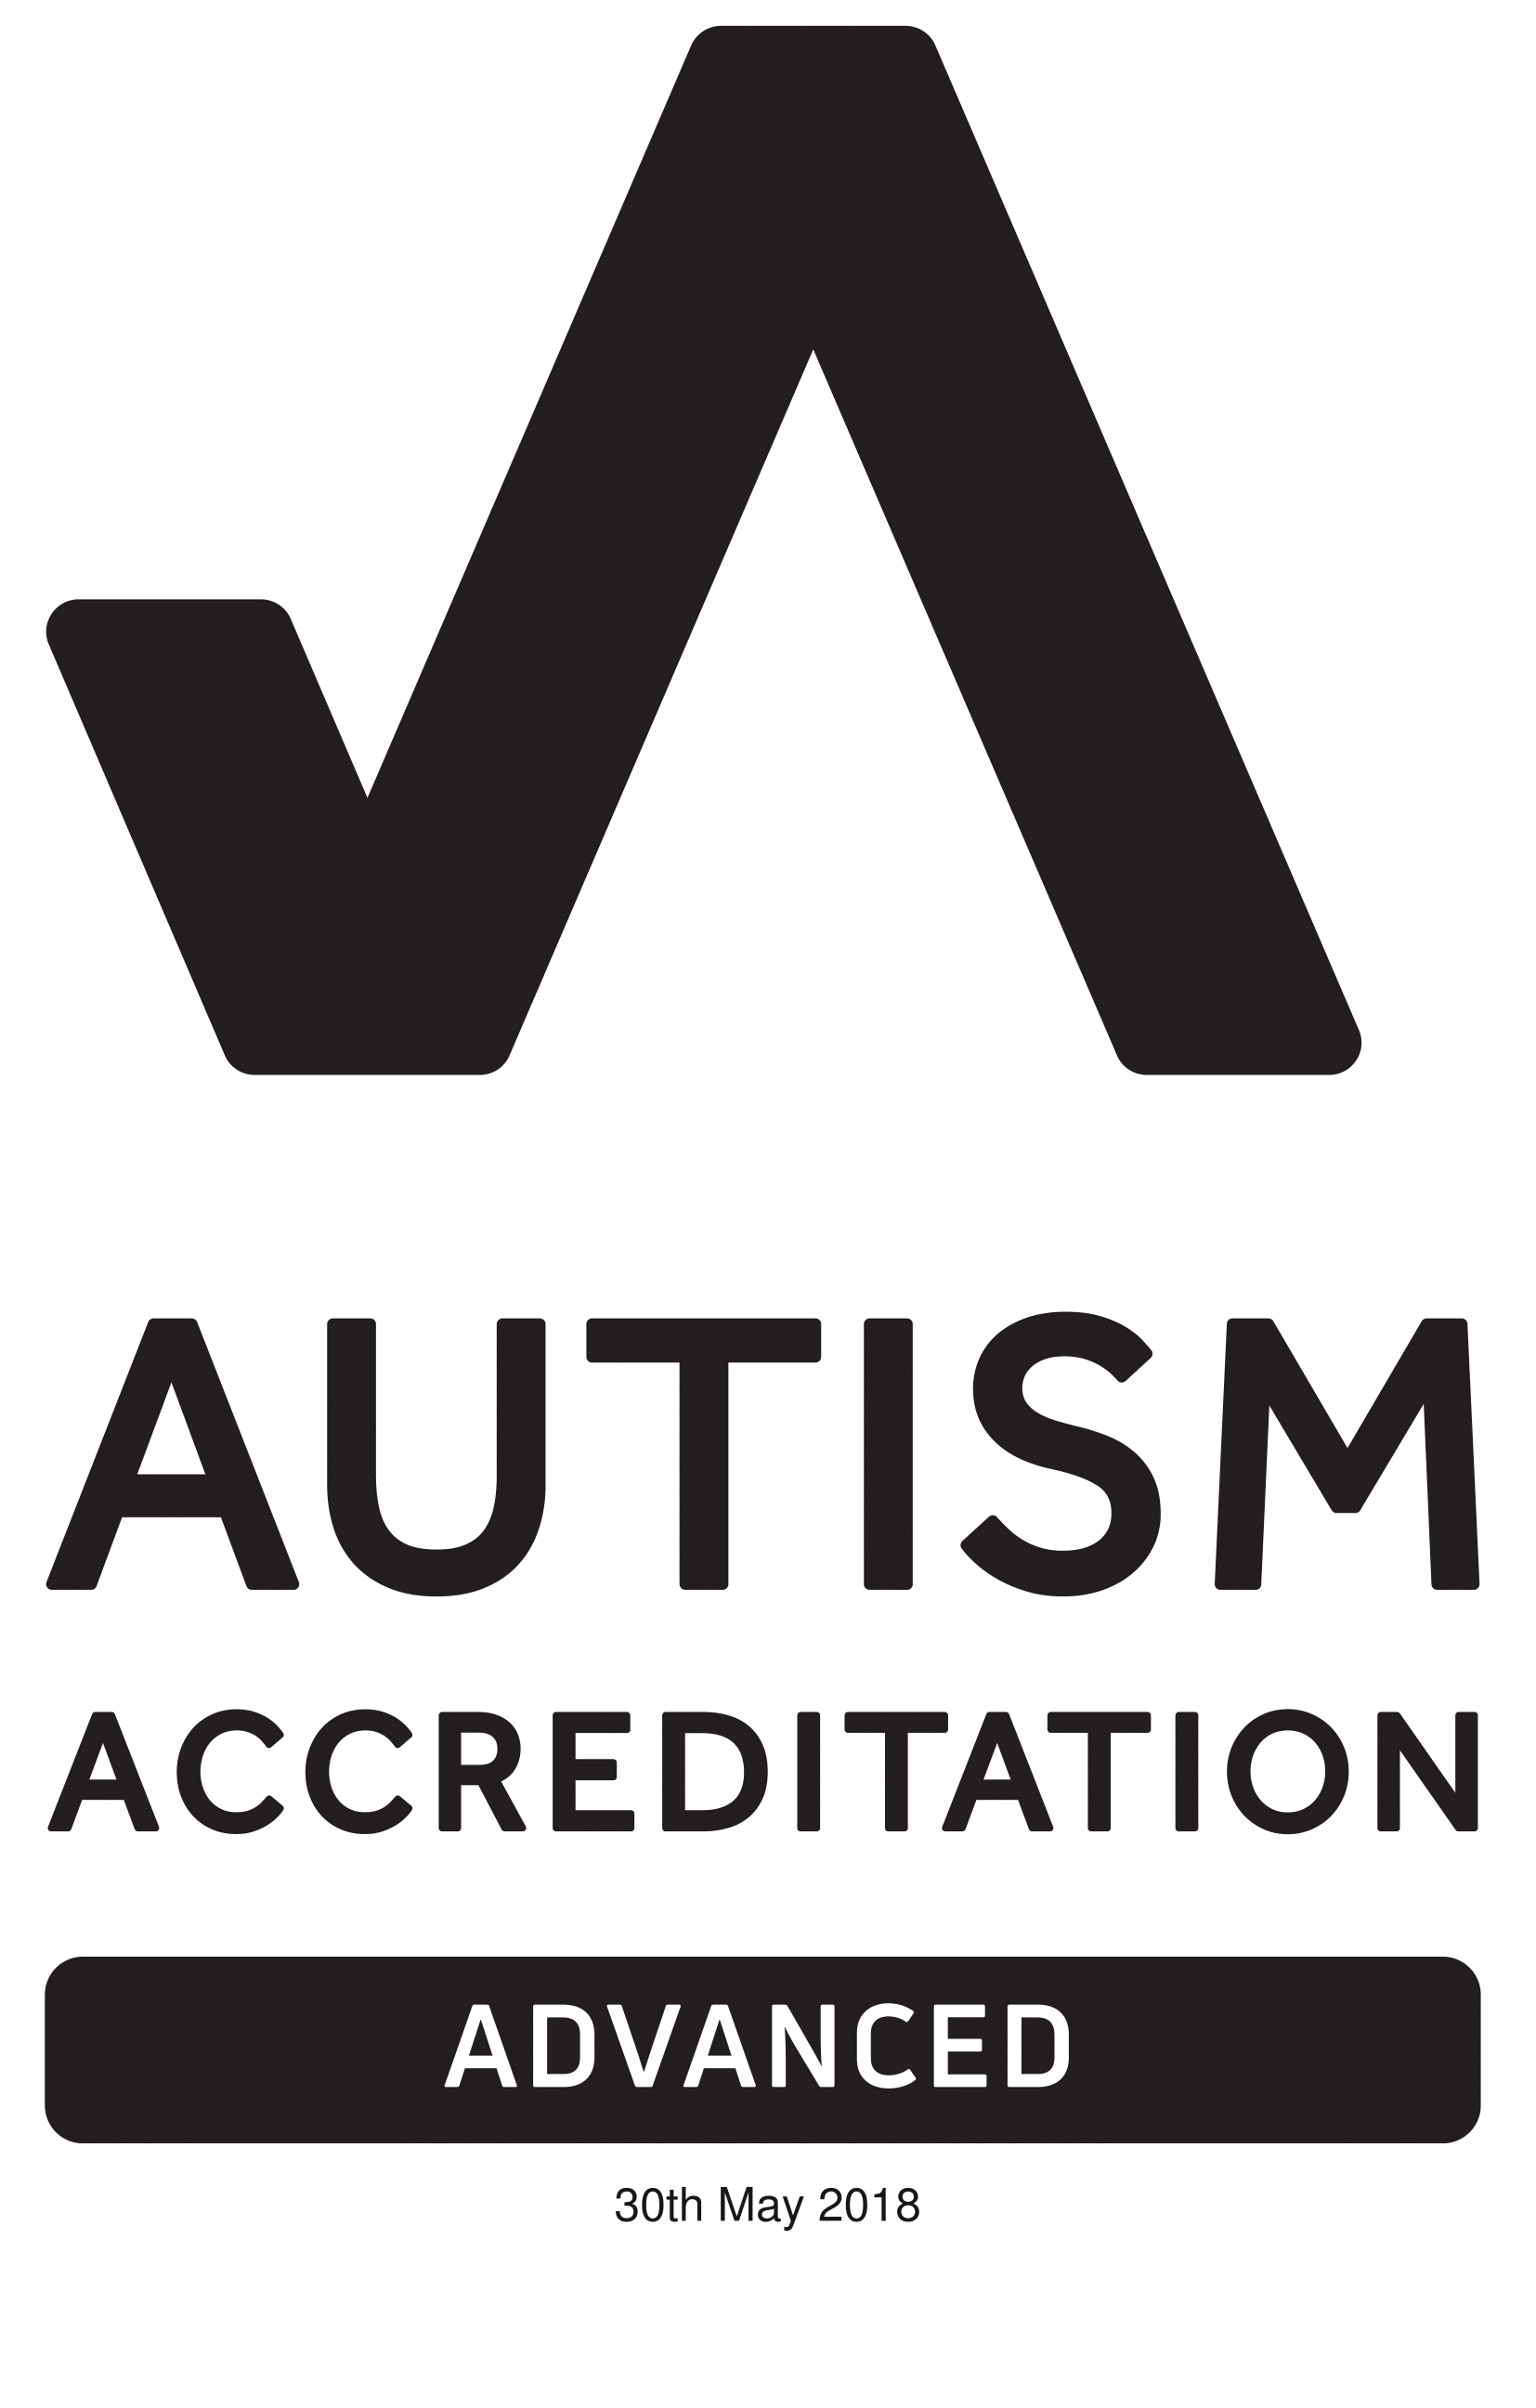 Autism Accredition and Ofsted Outstanding Provider